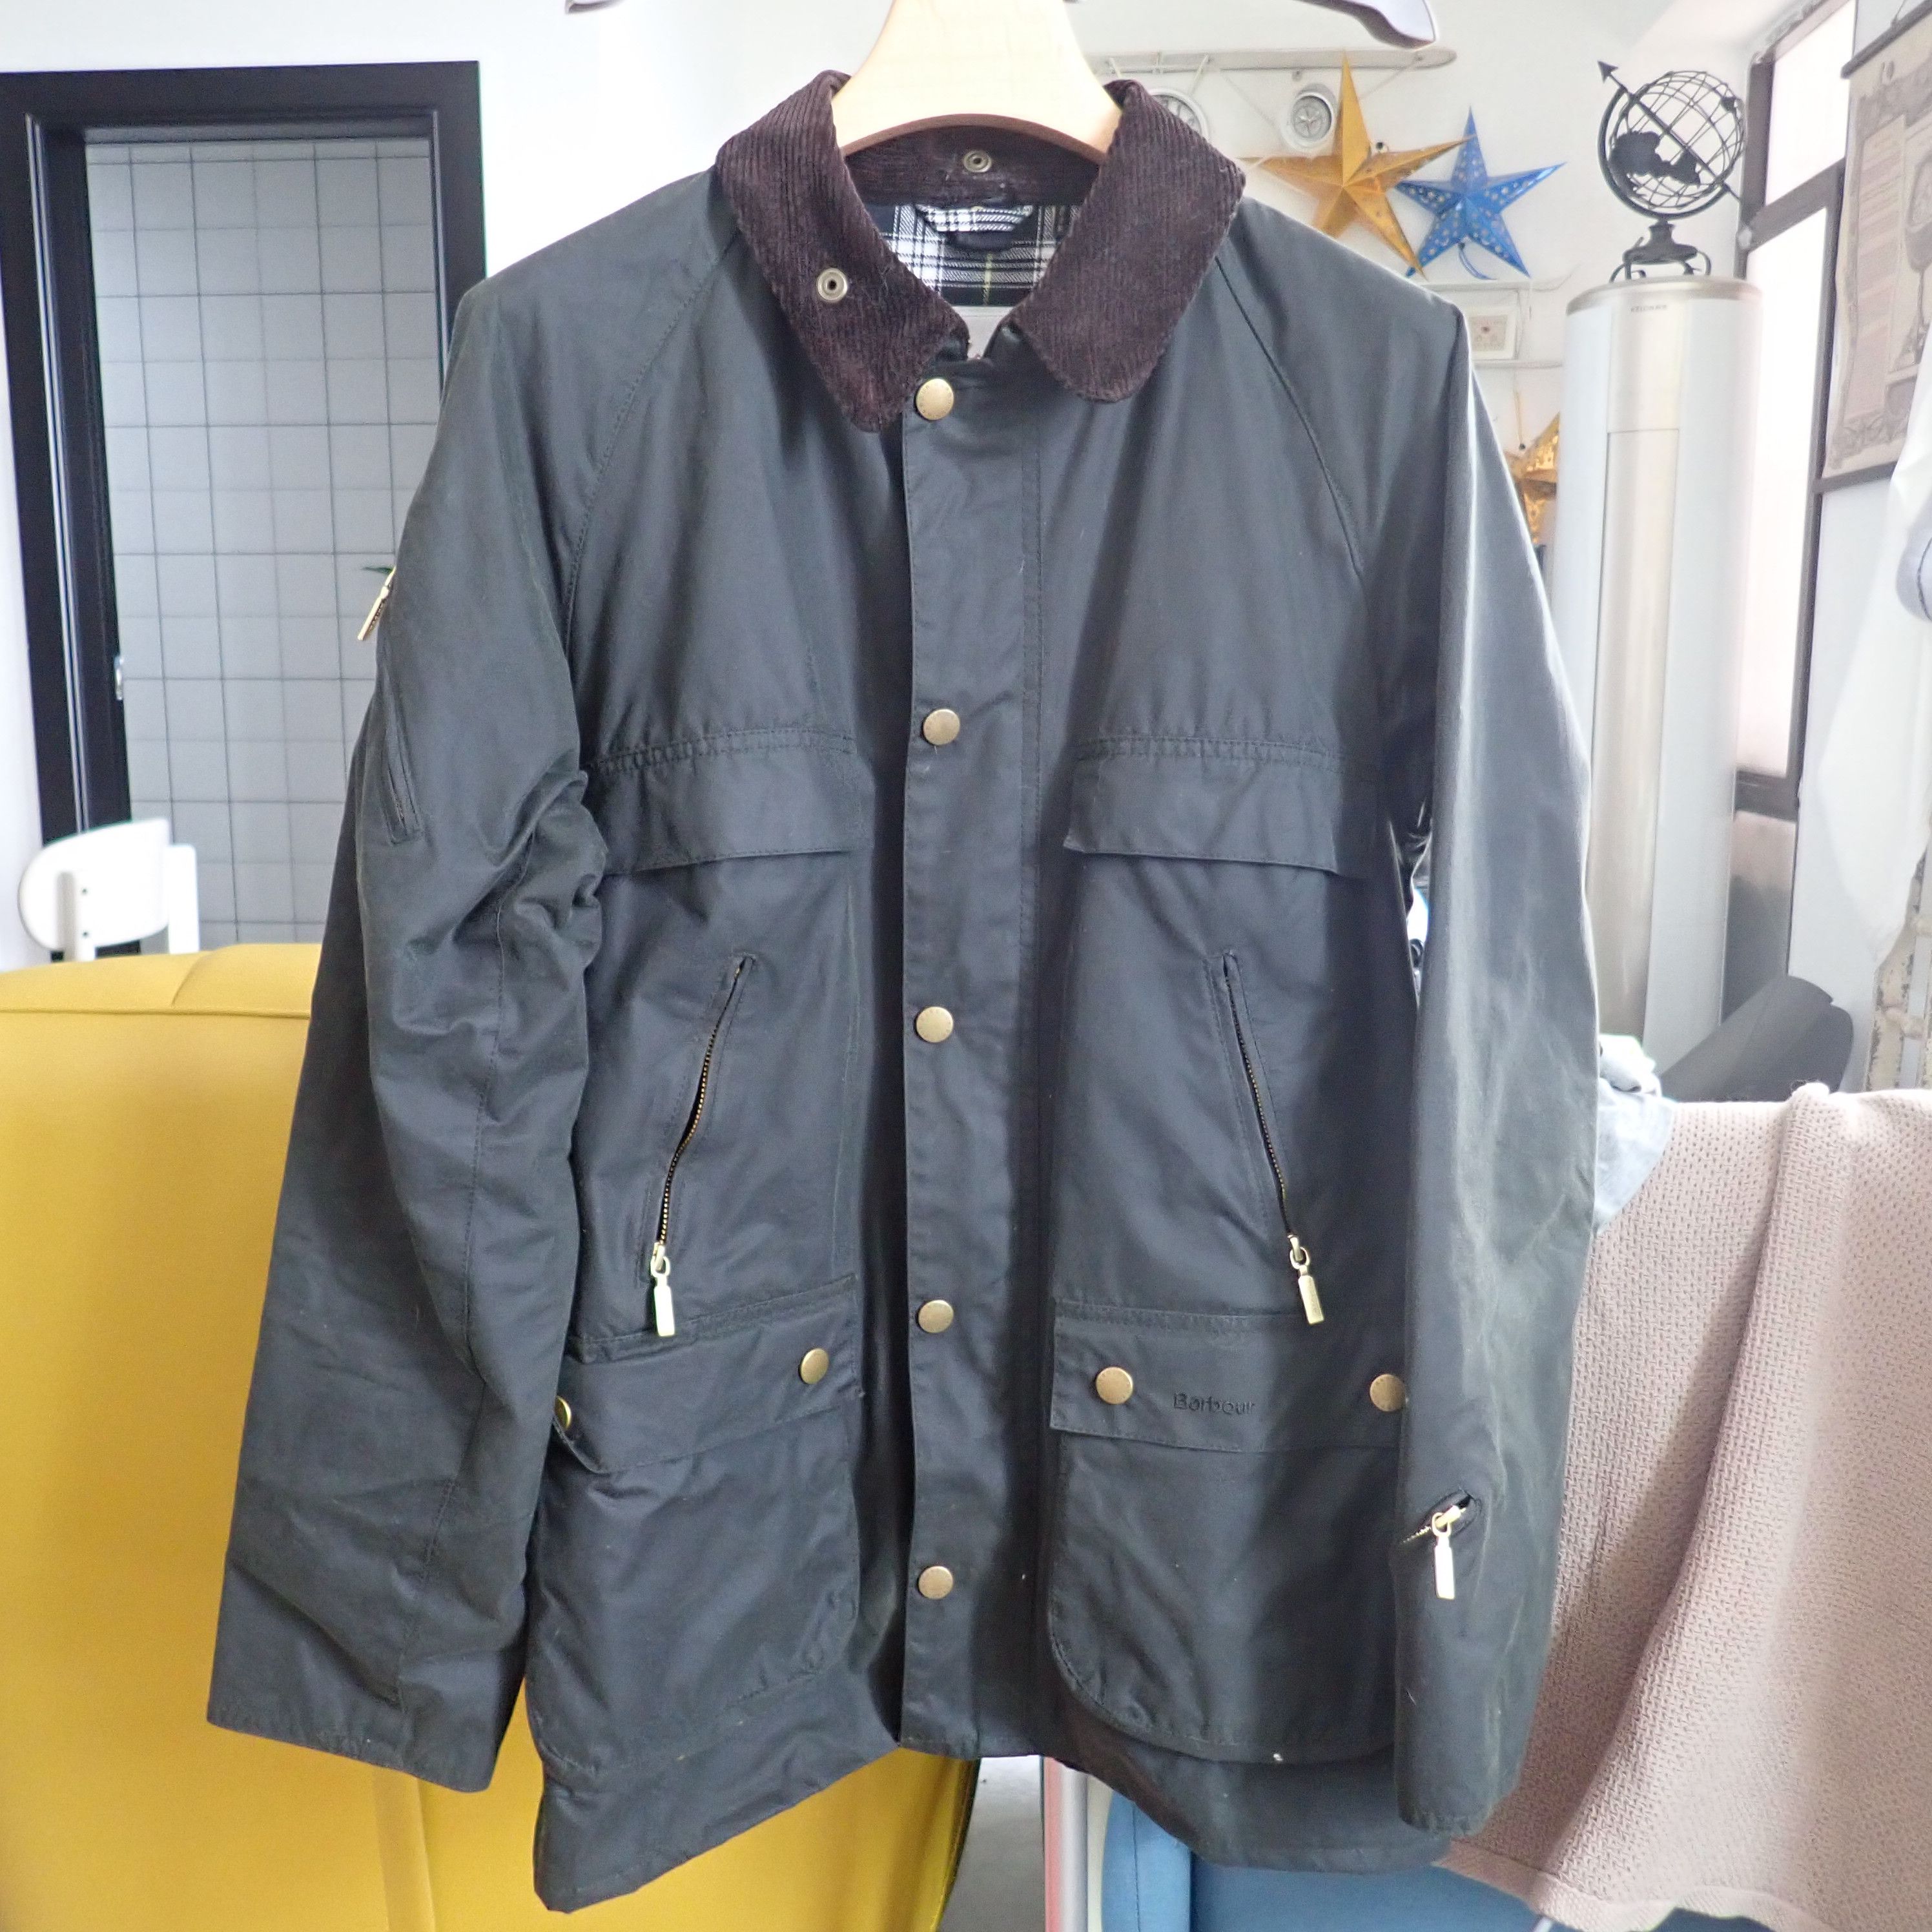 Barbour barbour icons 125 anniversary bedale | Grailed